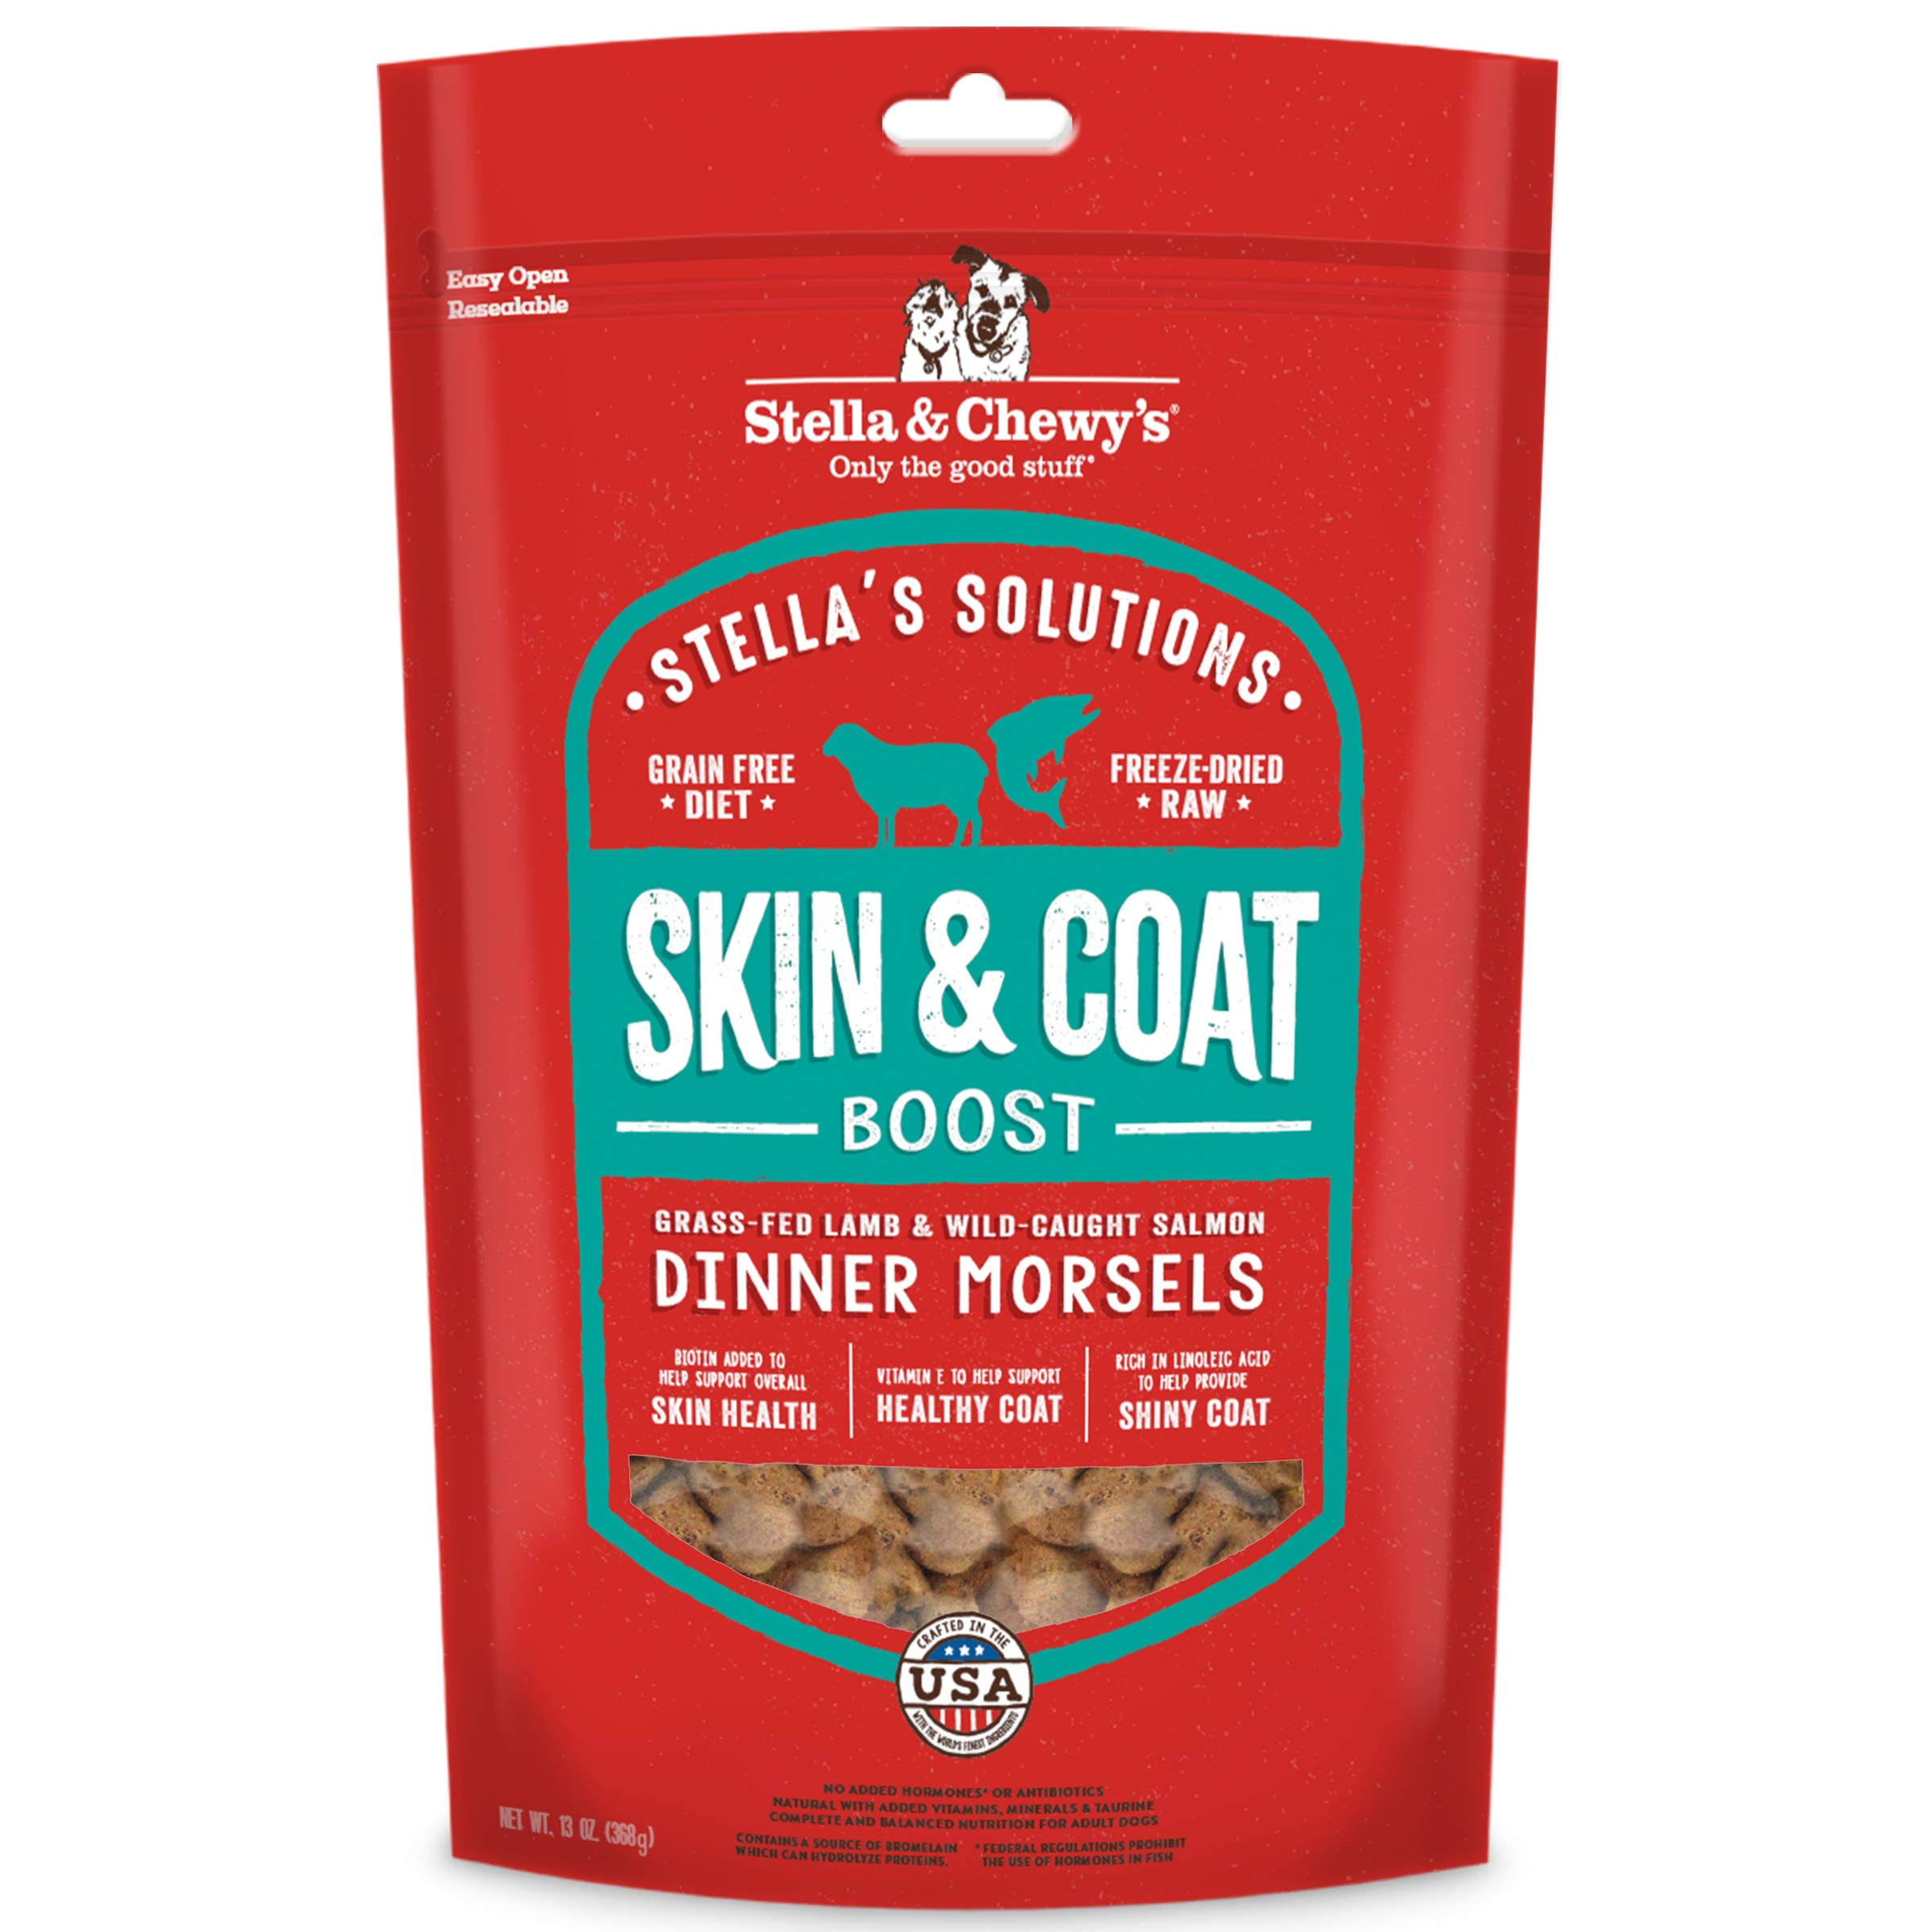 Stella & Chewy’s – Stella’s Solutions Skin & Coat Boost – Grass-Fed Lamb & Wild-Caught Salmon Dinner Morsels – Freeze-Dried Raw, Protein Rich, Grain